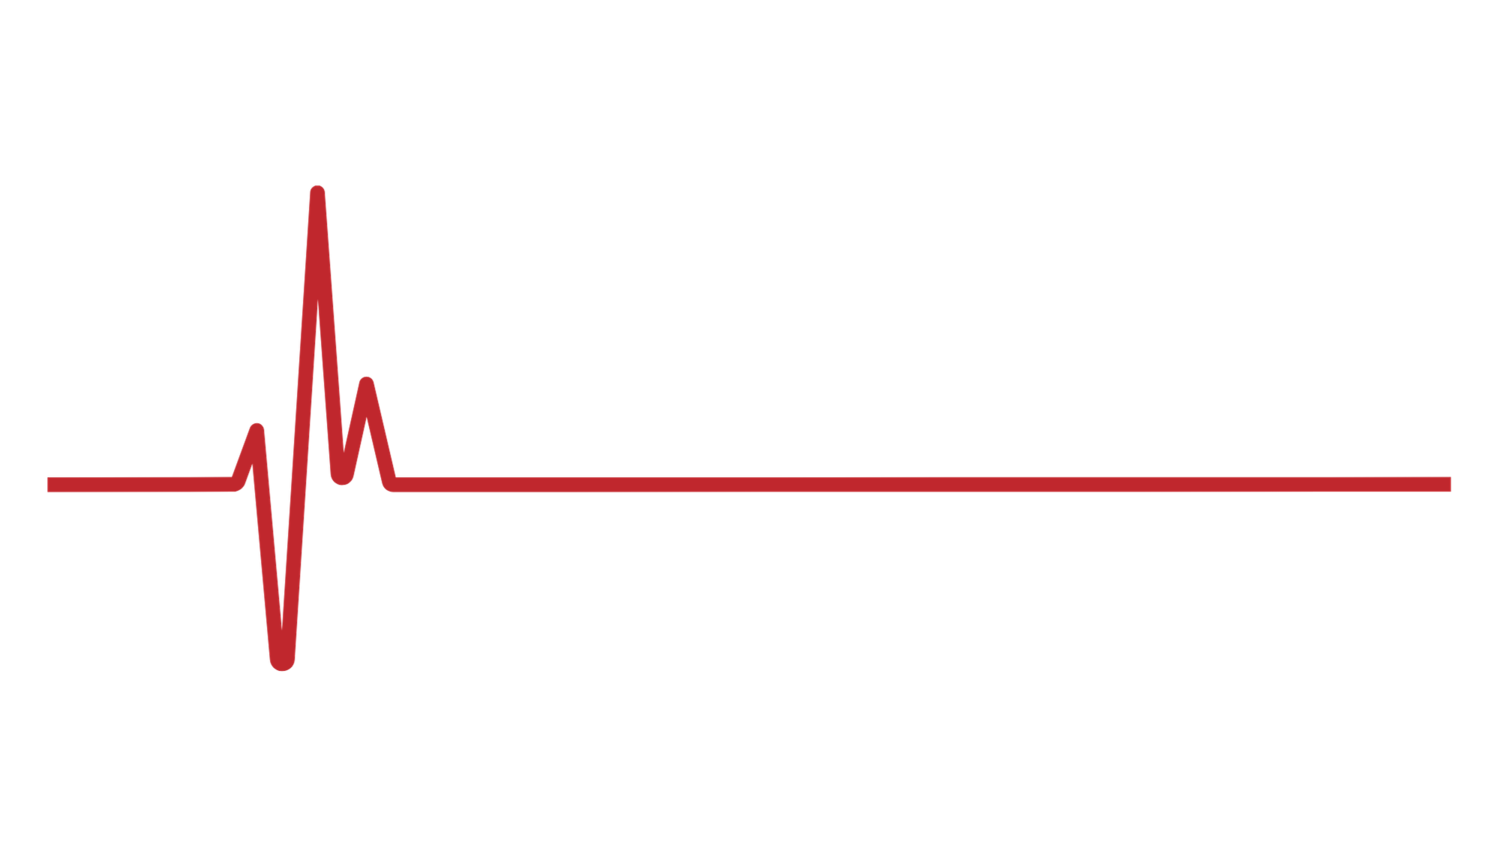 Frost Rescue - CPR &amp; First Aid Training